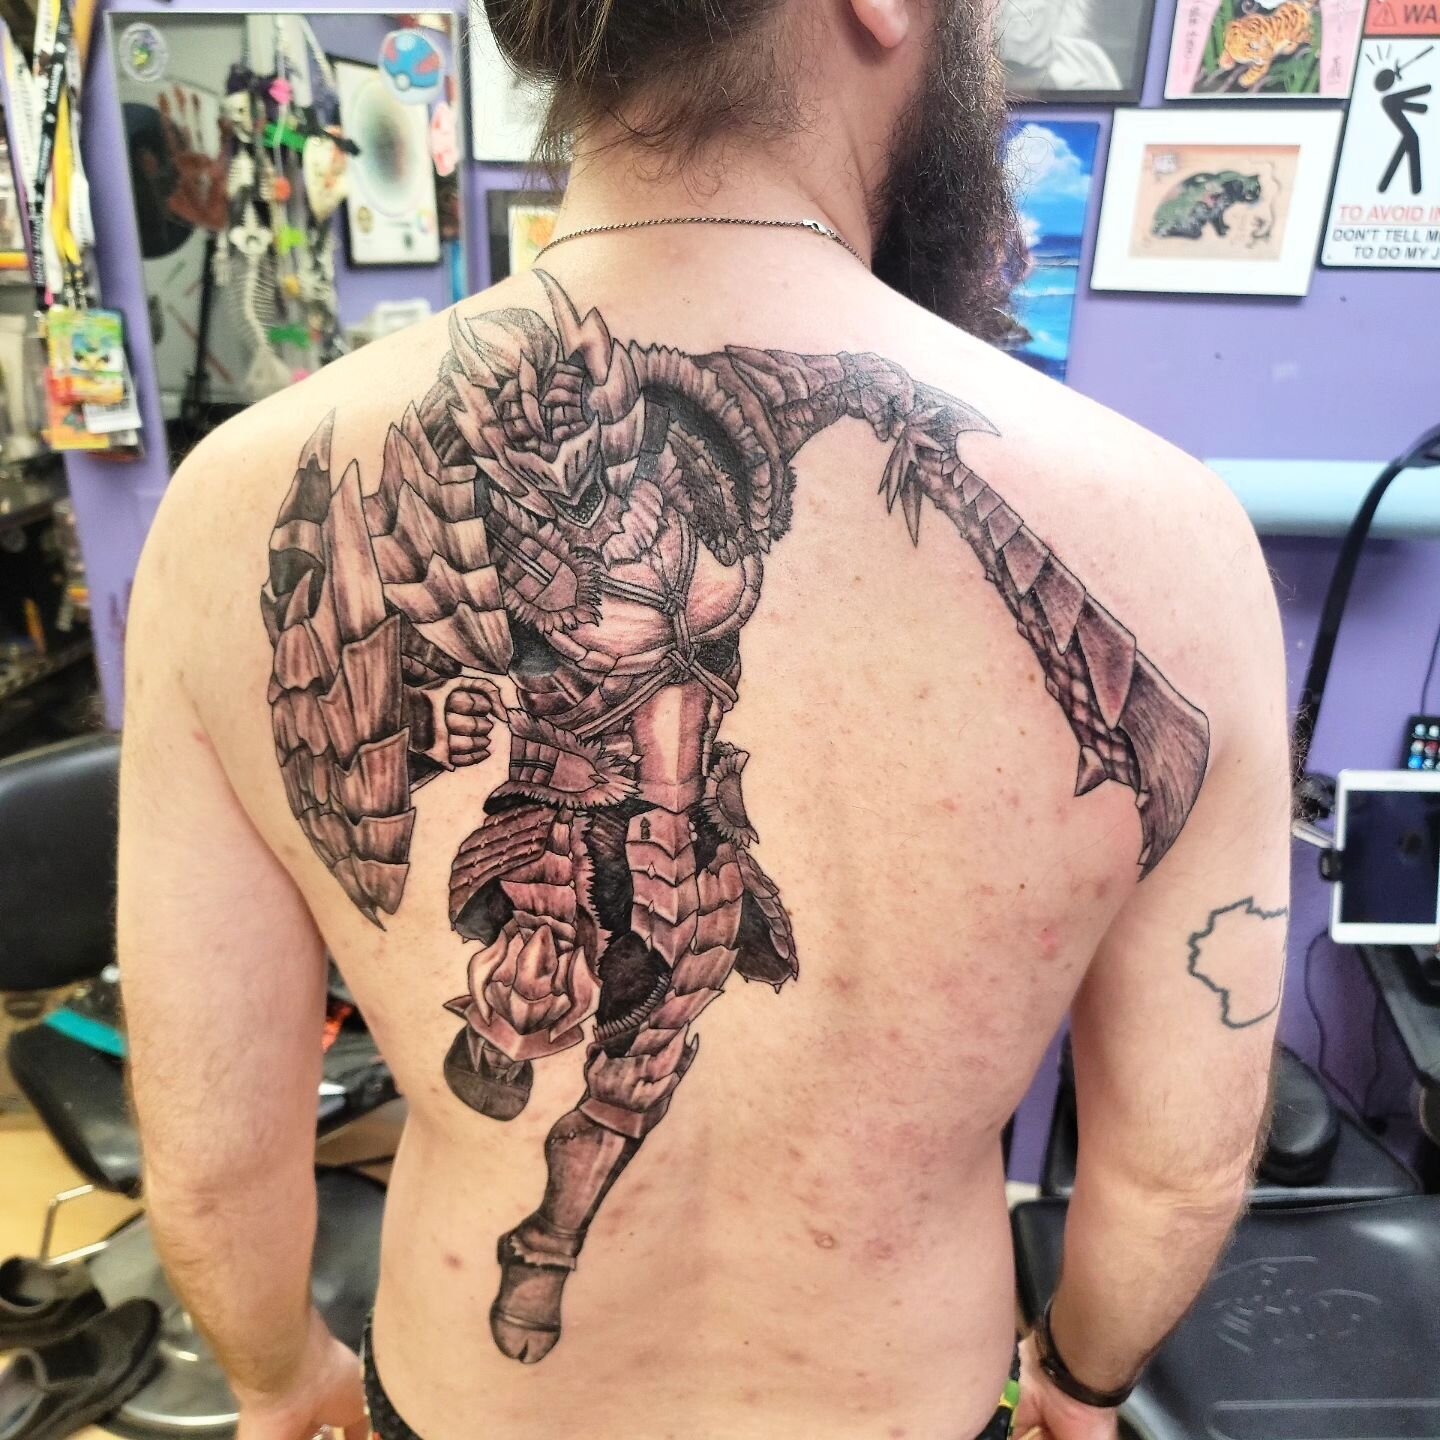 Crazy excited to have @kappatattoolive finish this unreal Zinogre tattoo in one go! I've loved this guy since the early days of Twitch Creative, great to spend time with him on this trip 🥰

#monsterhunter #monsterhuntertattoo @monsterhuntergame #kap